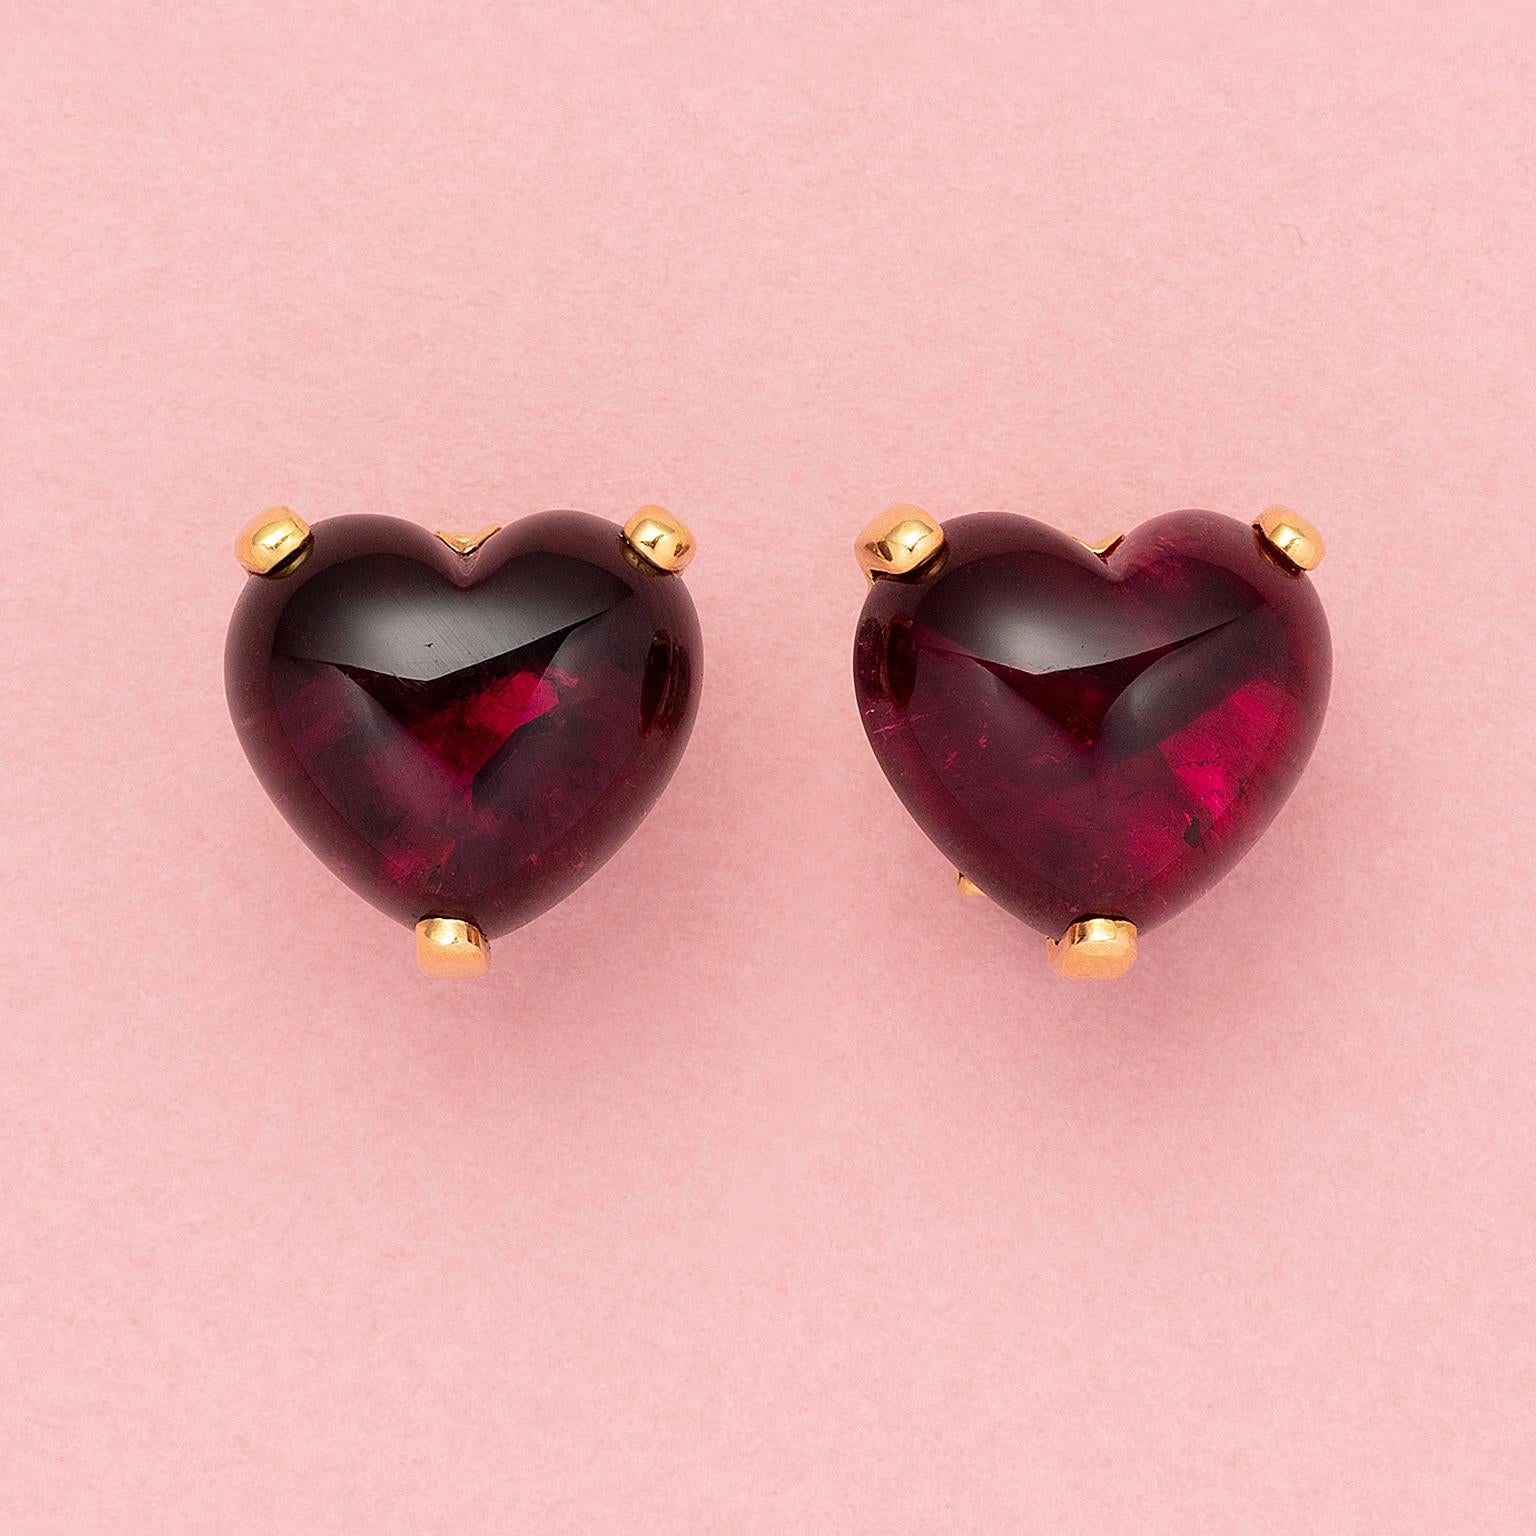 A pair of 18 carat gold earrings with thick dark pink tourmaline hearts, signed: Steltman.

weight: 14.75 grams.
dimensions: 1.6 x 1.6 cm.